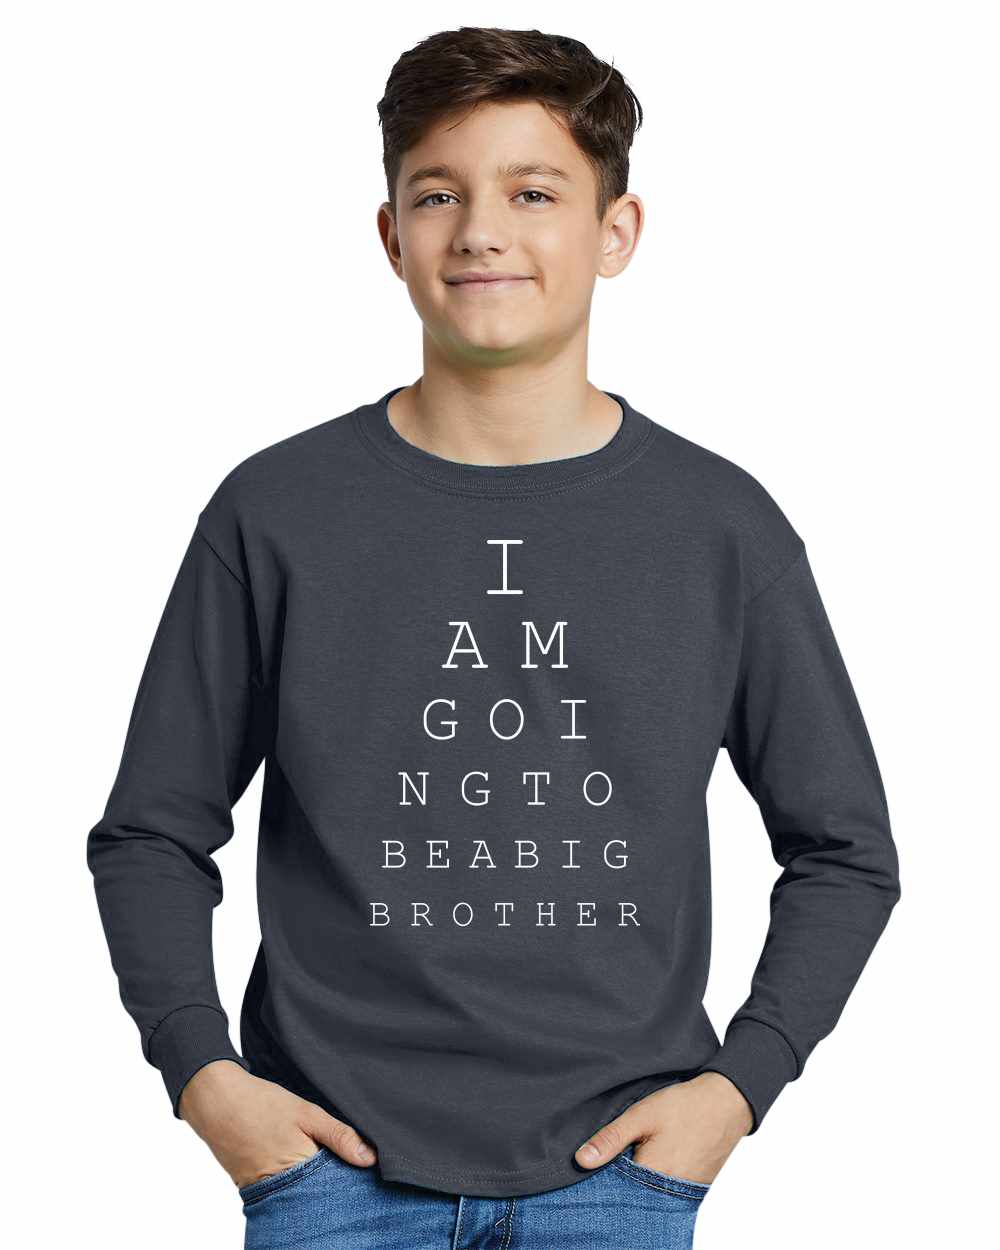 I AM GOING TO BE BIG BROTHER EYE CHART on Youth Long Sleeve Shirt (#1008-203)